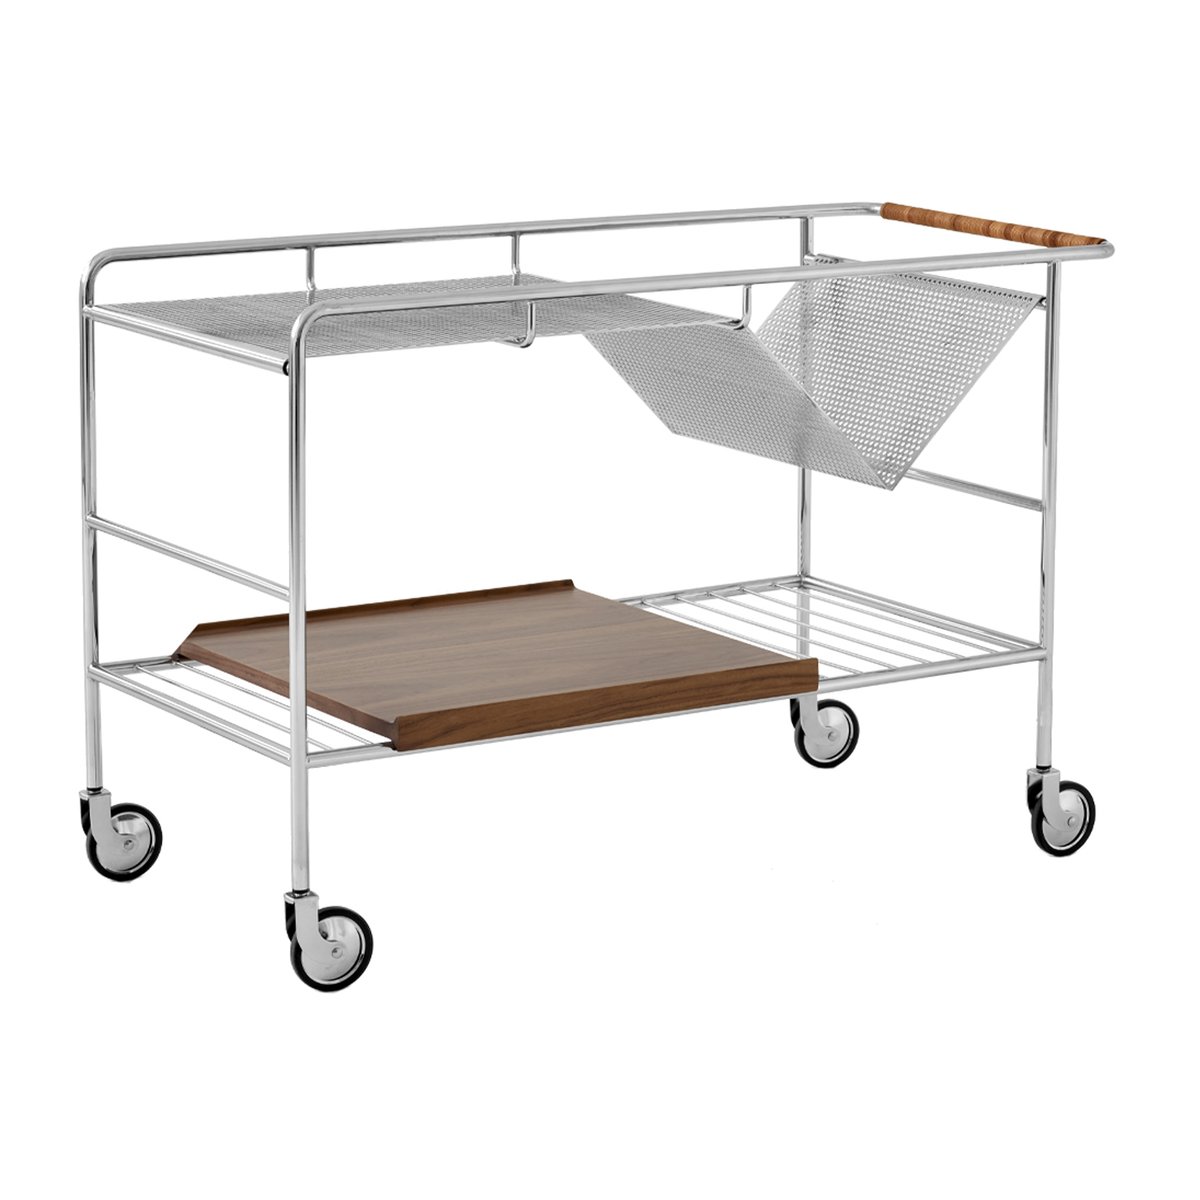 &Tradition Alima opbergtrolley gelakt walnoot Chrome & lacquered walnut